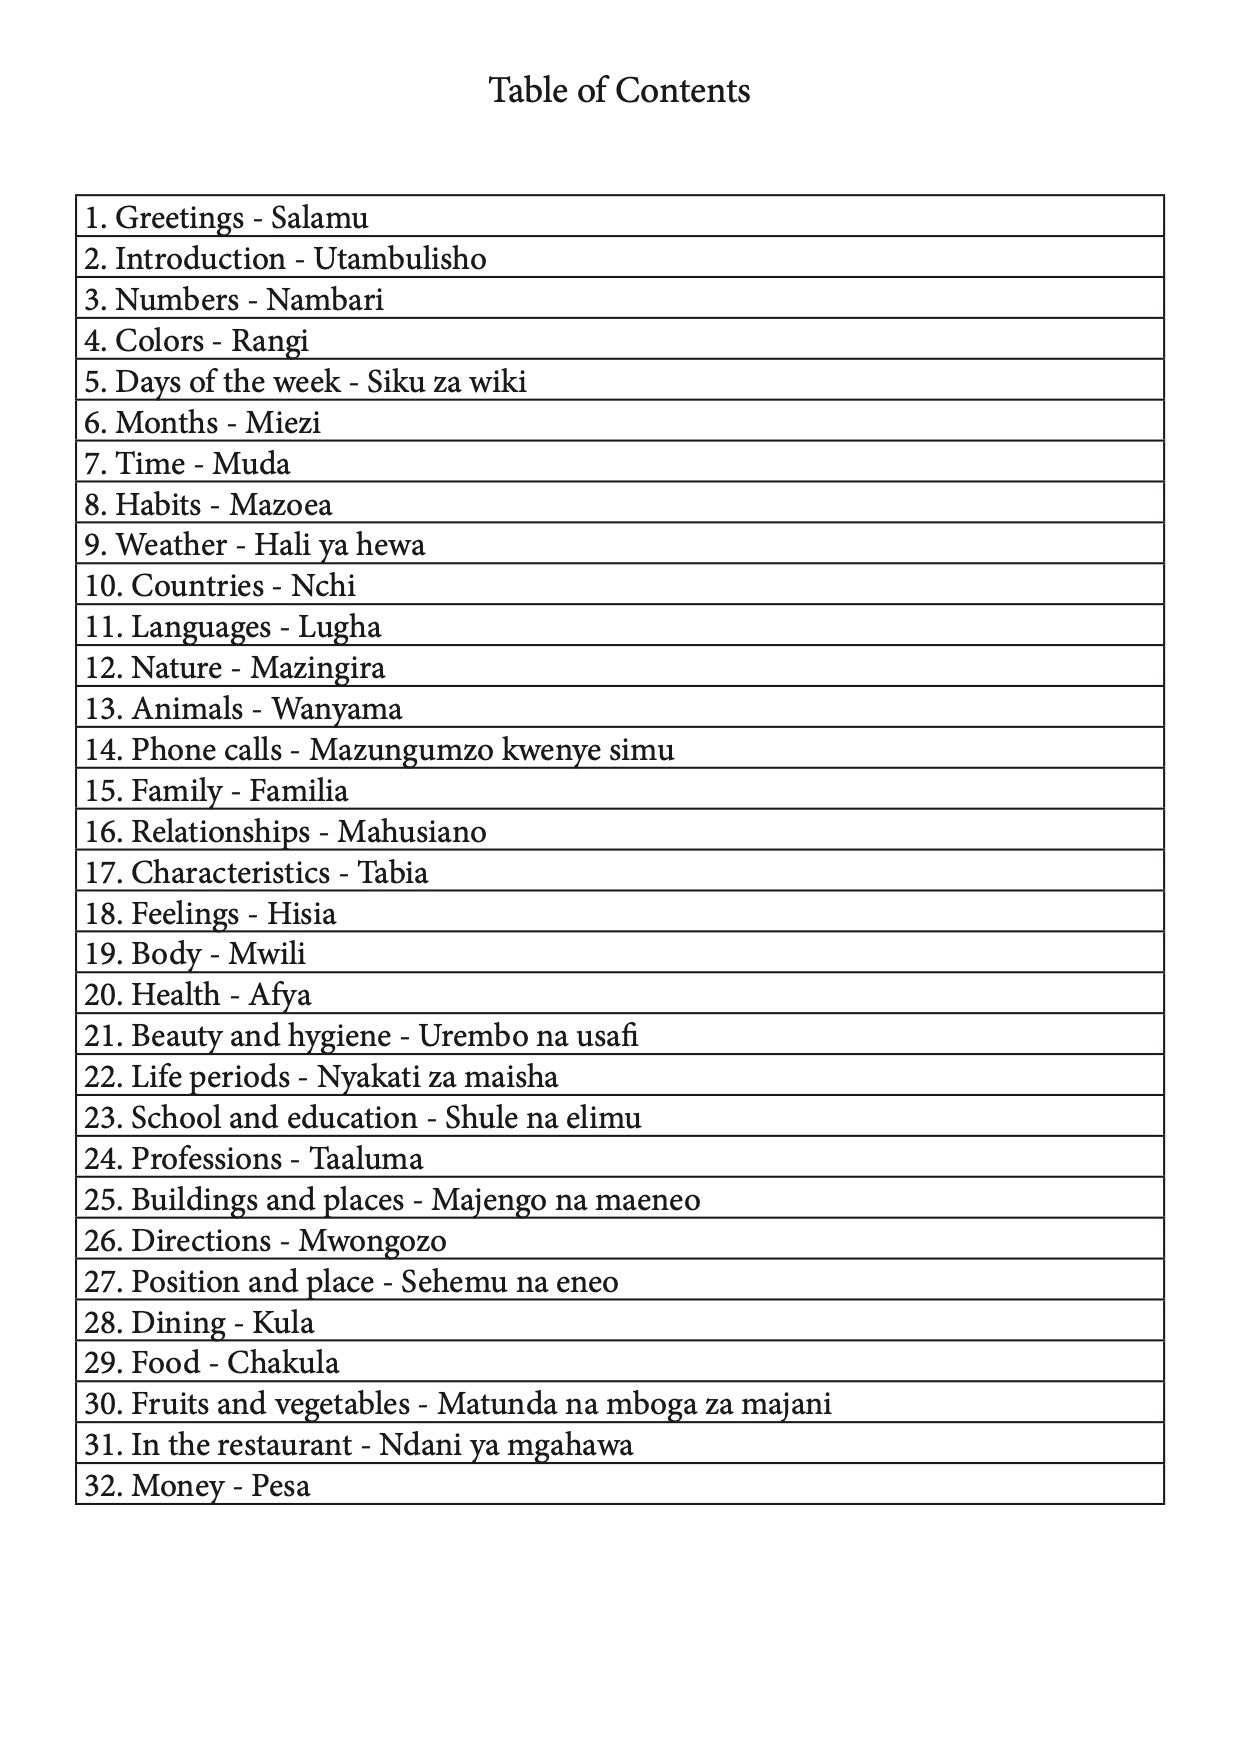 Ultimate Swahili Notebook contents page 1